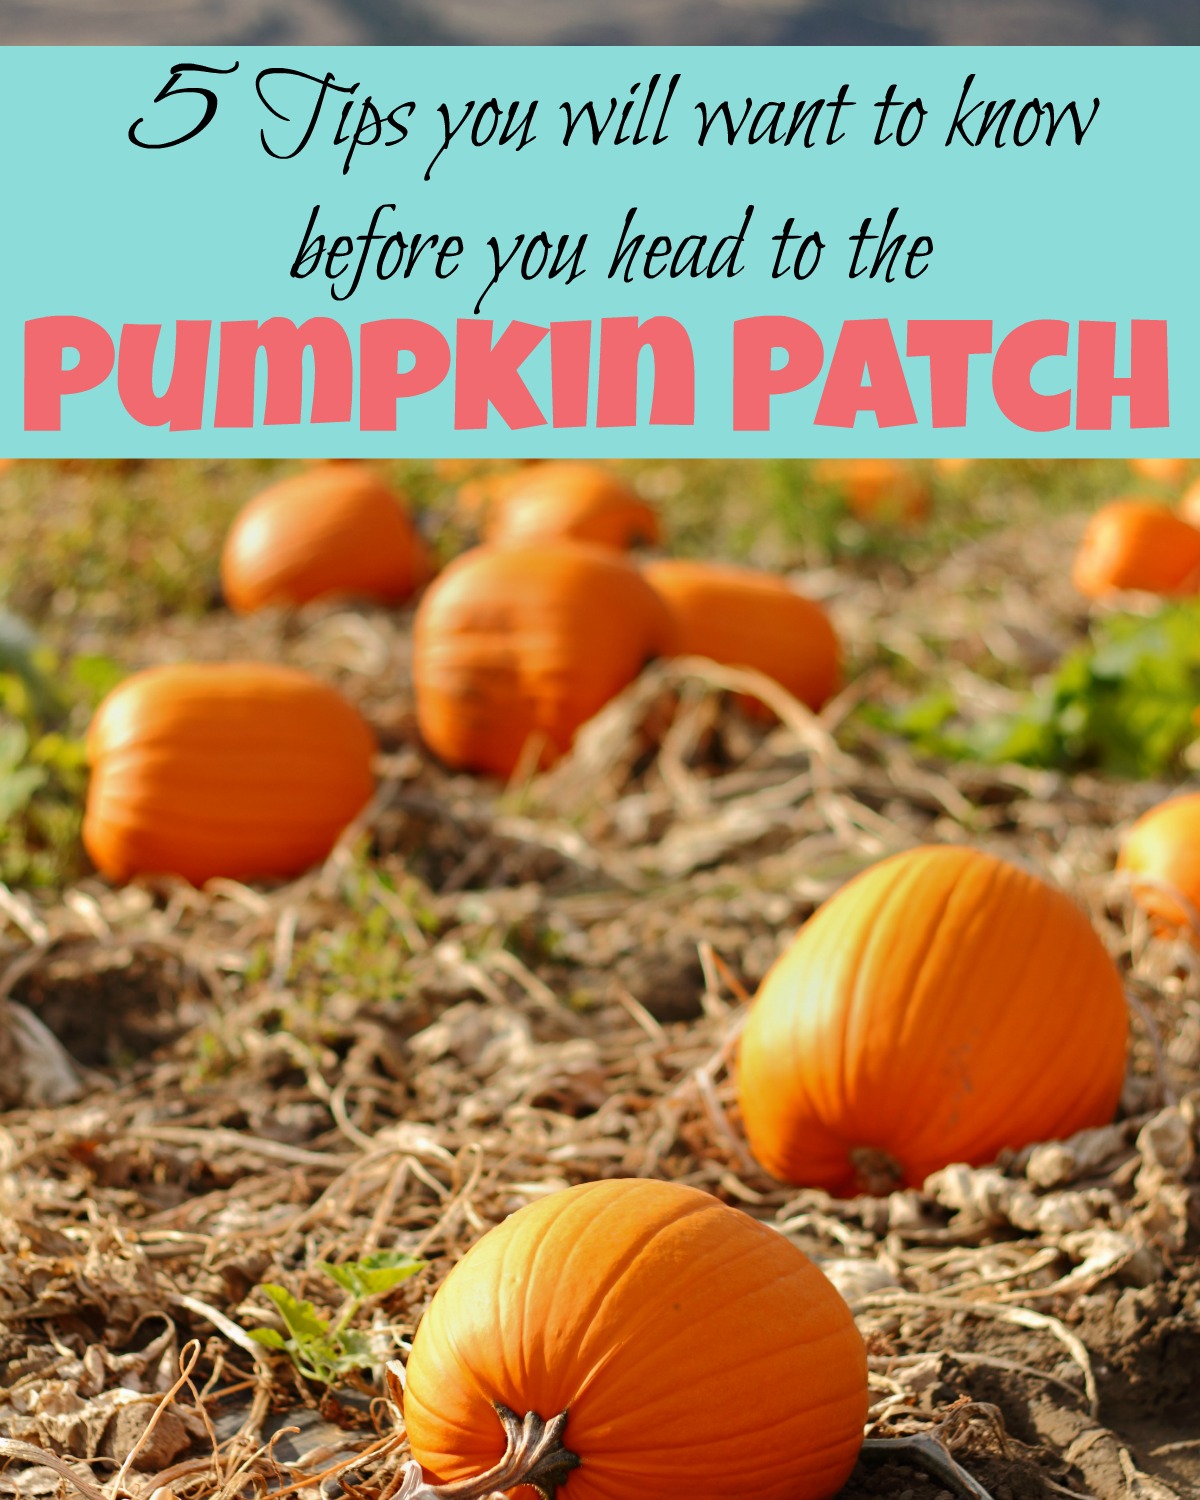 5 tips that will make your day at the pumpkin patch even more fun